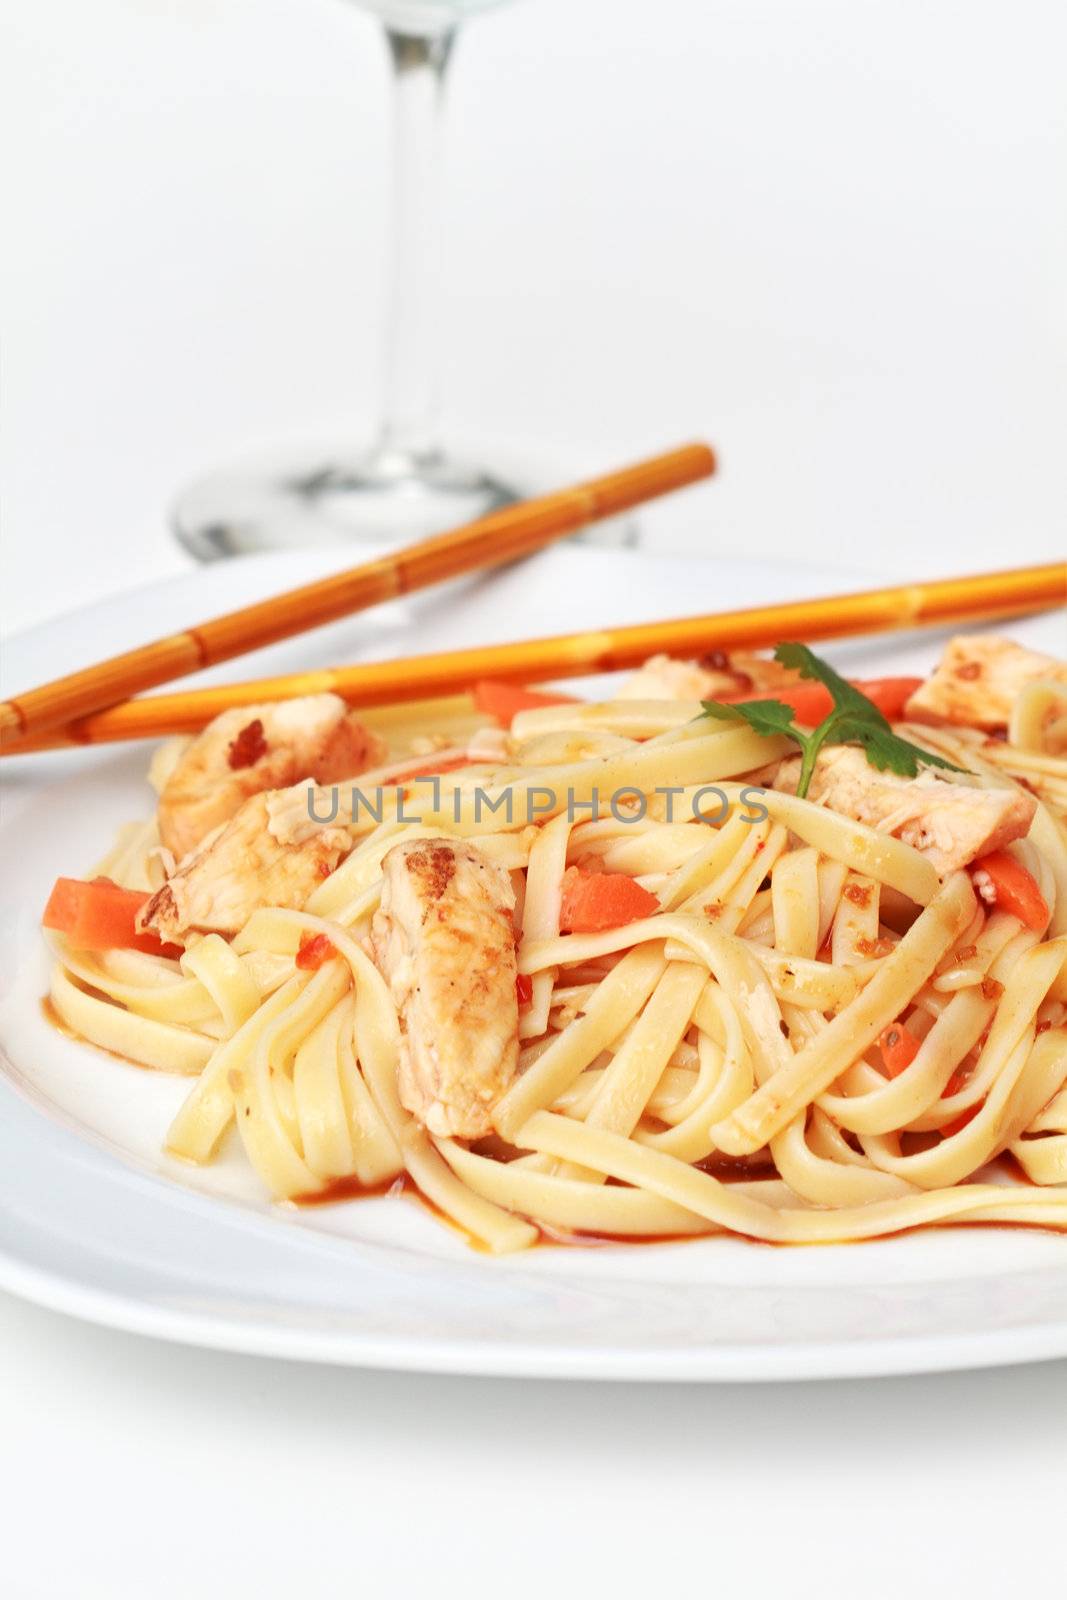 Asian Chicken Pasta by StephanieFrey